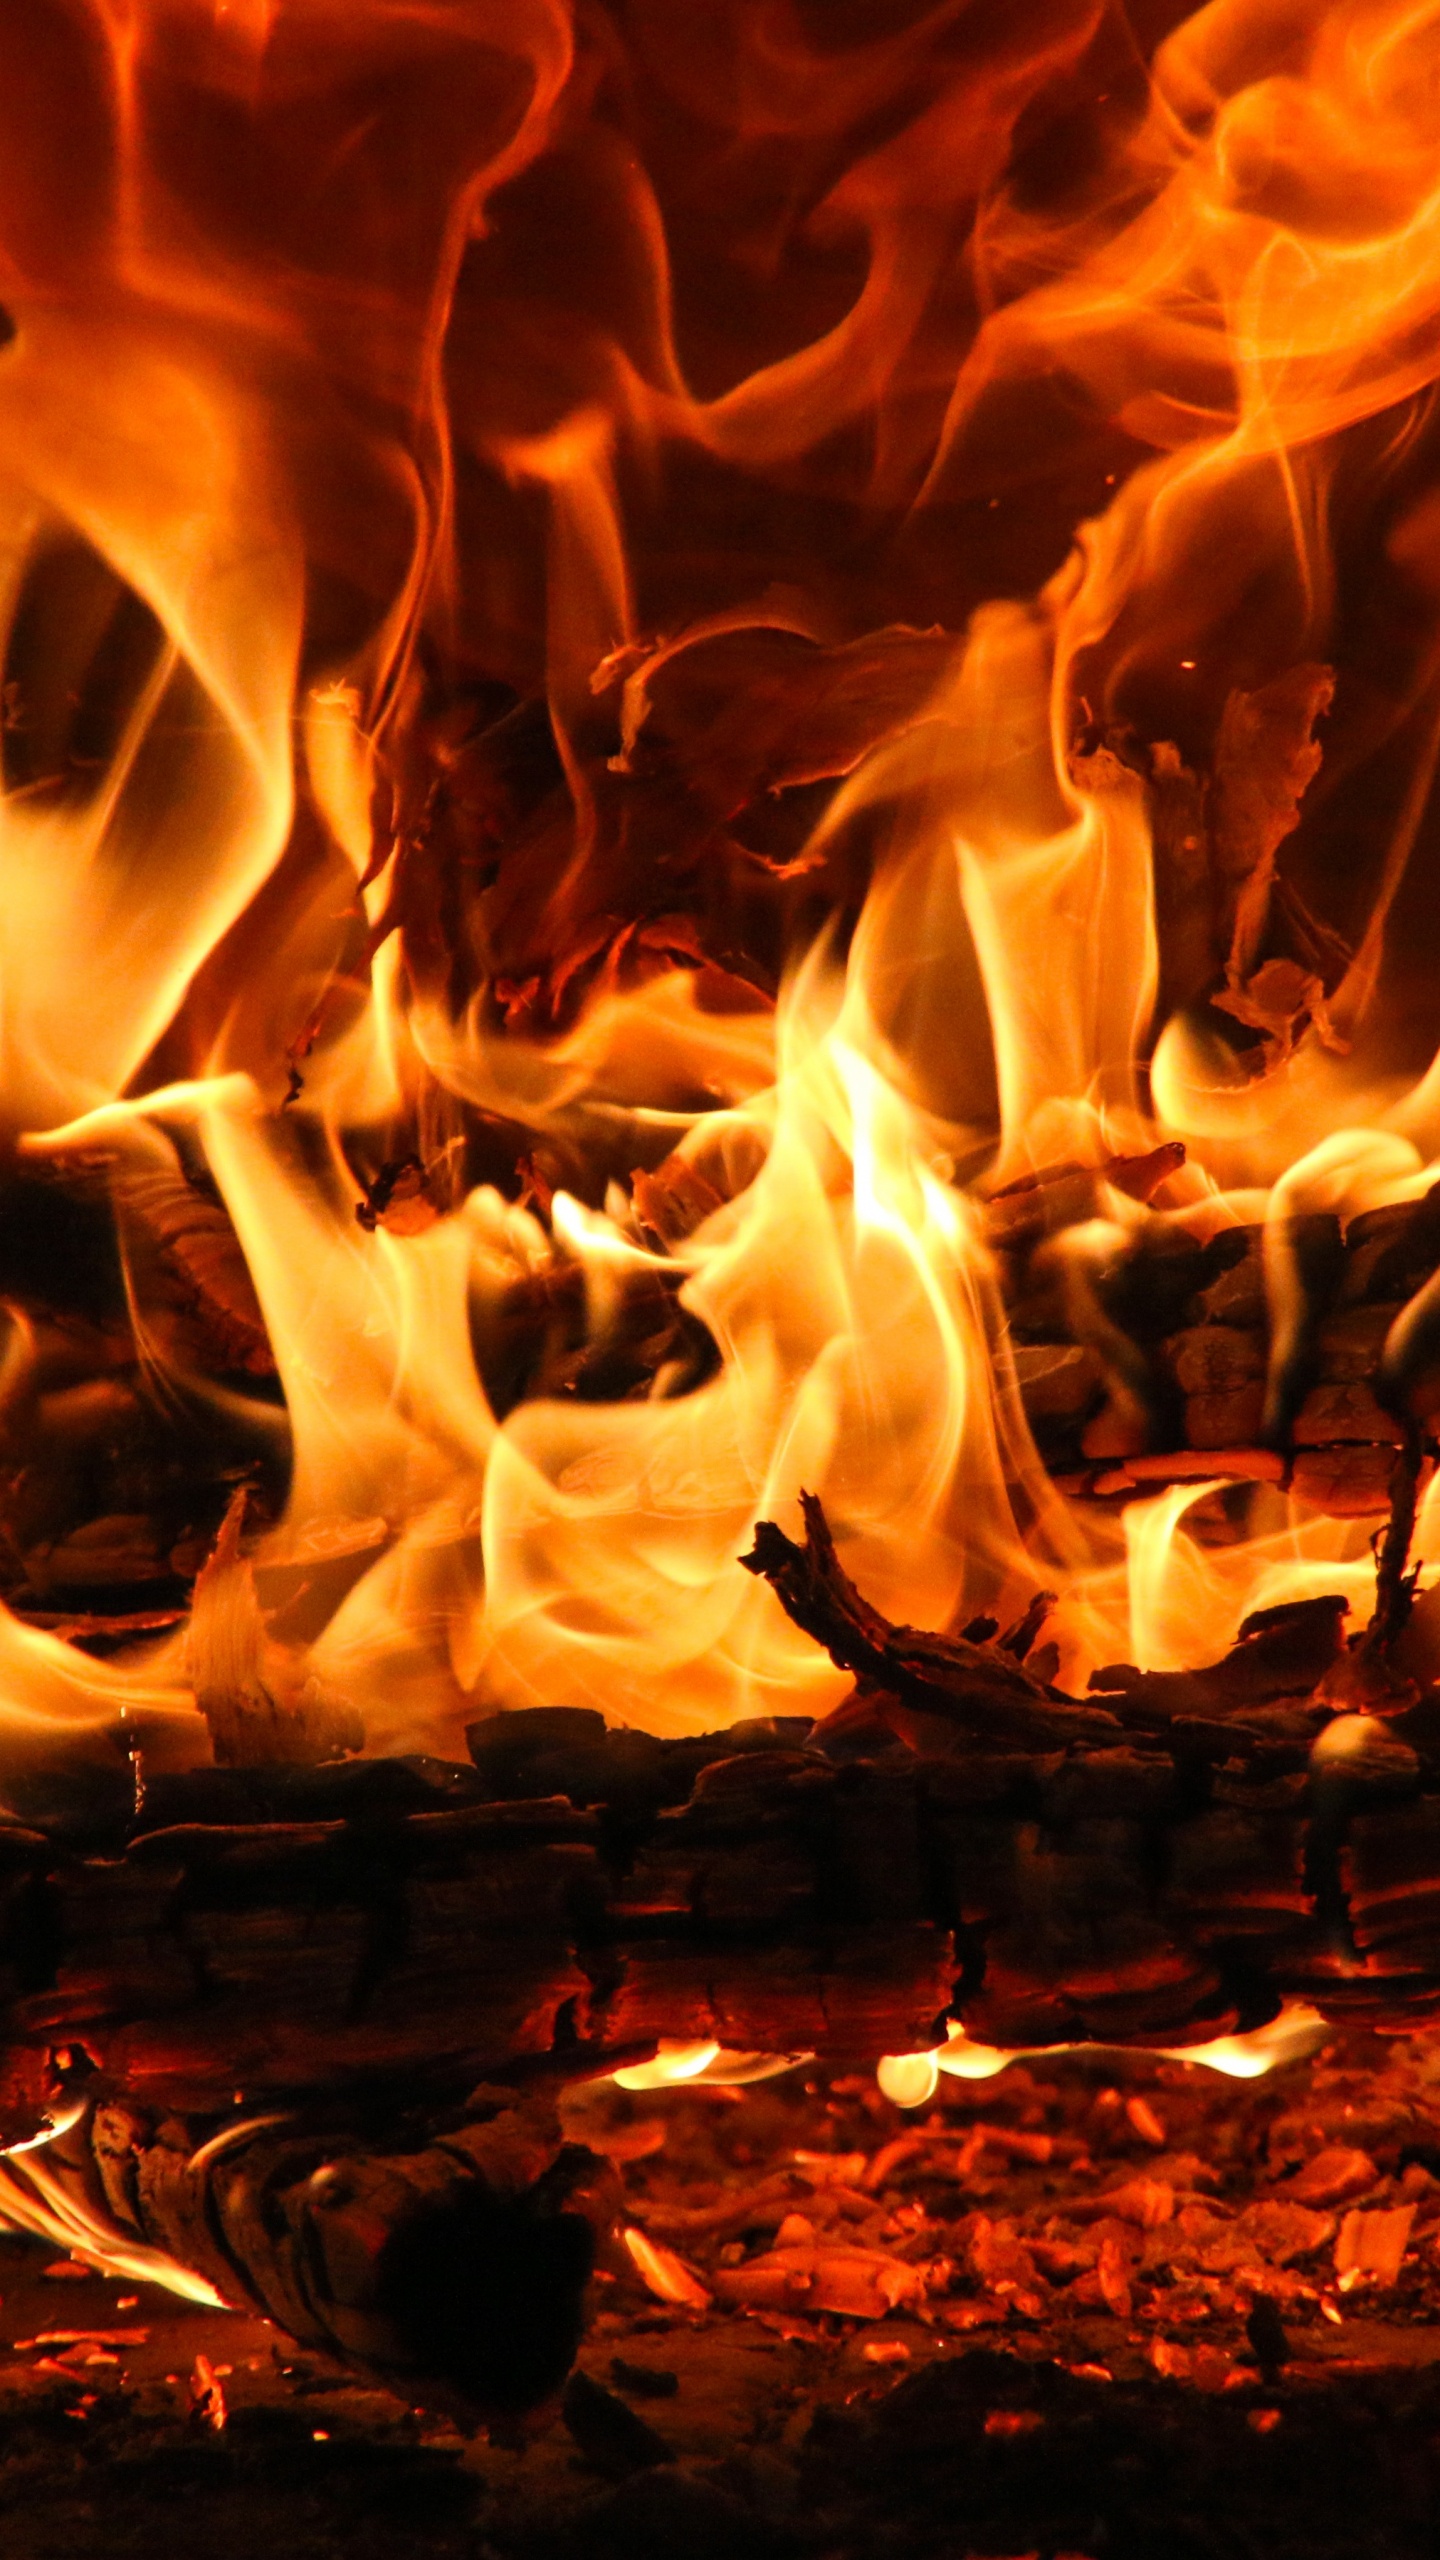 Burning Wood on Brown Soil. Wallpaper in 1440x2560 Resolution